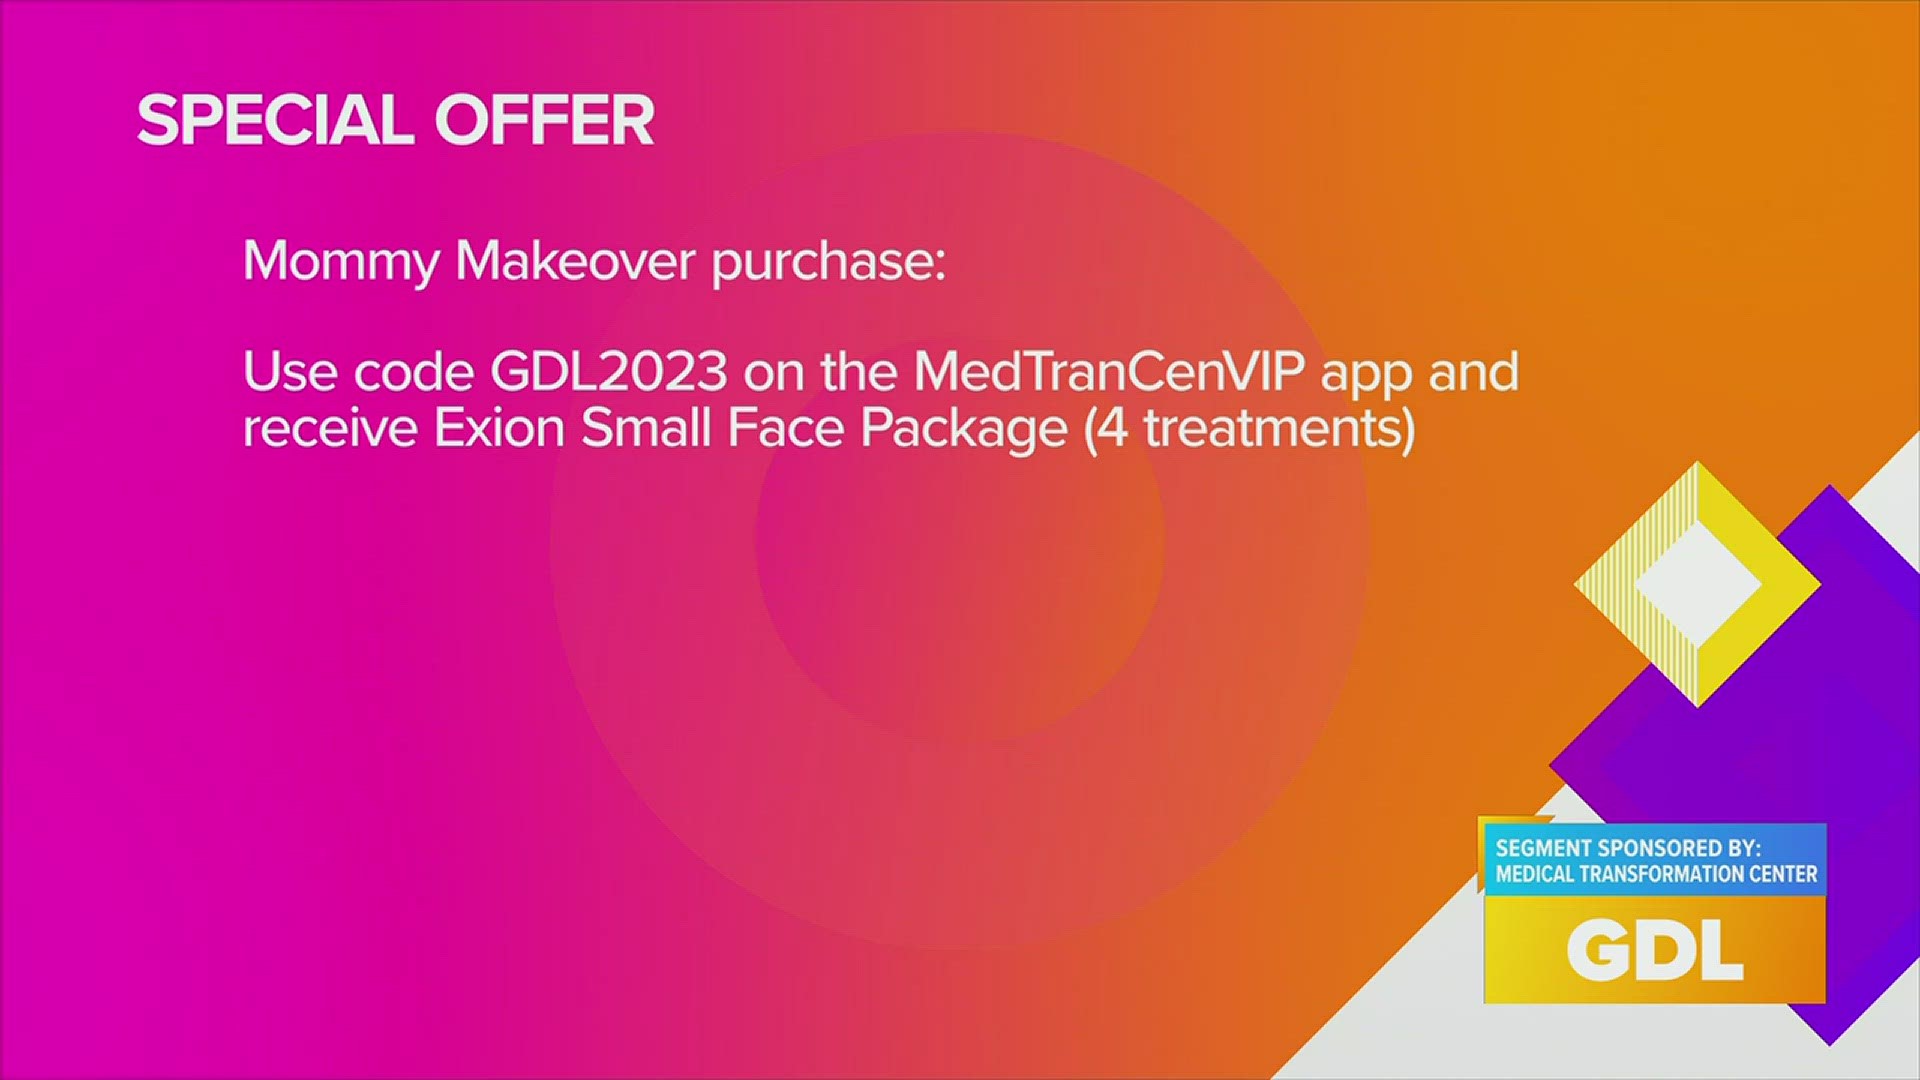 Take advantage of a special offer on the Mommy Makeover package. Use GDL2023 to unlock a special offer.